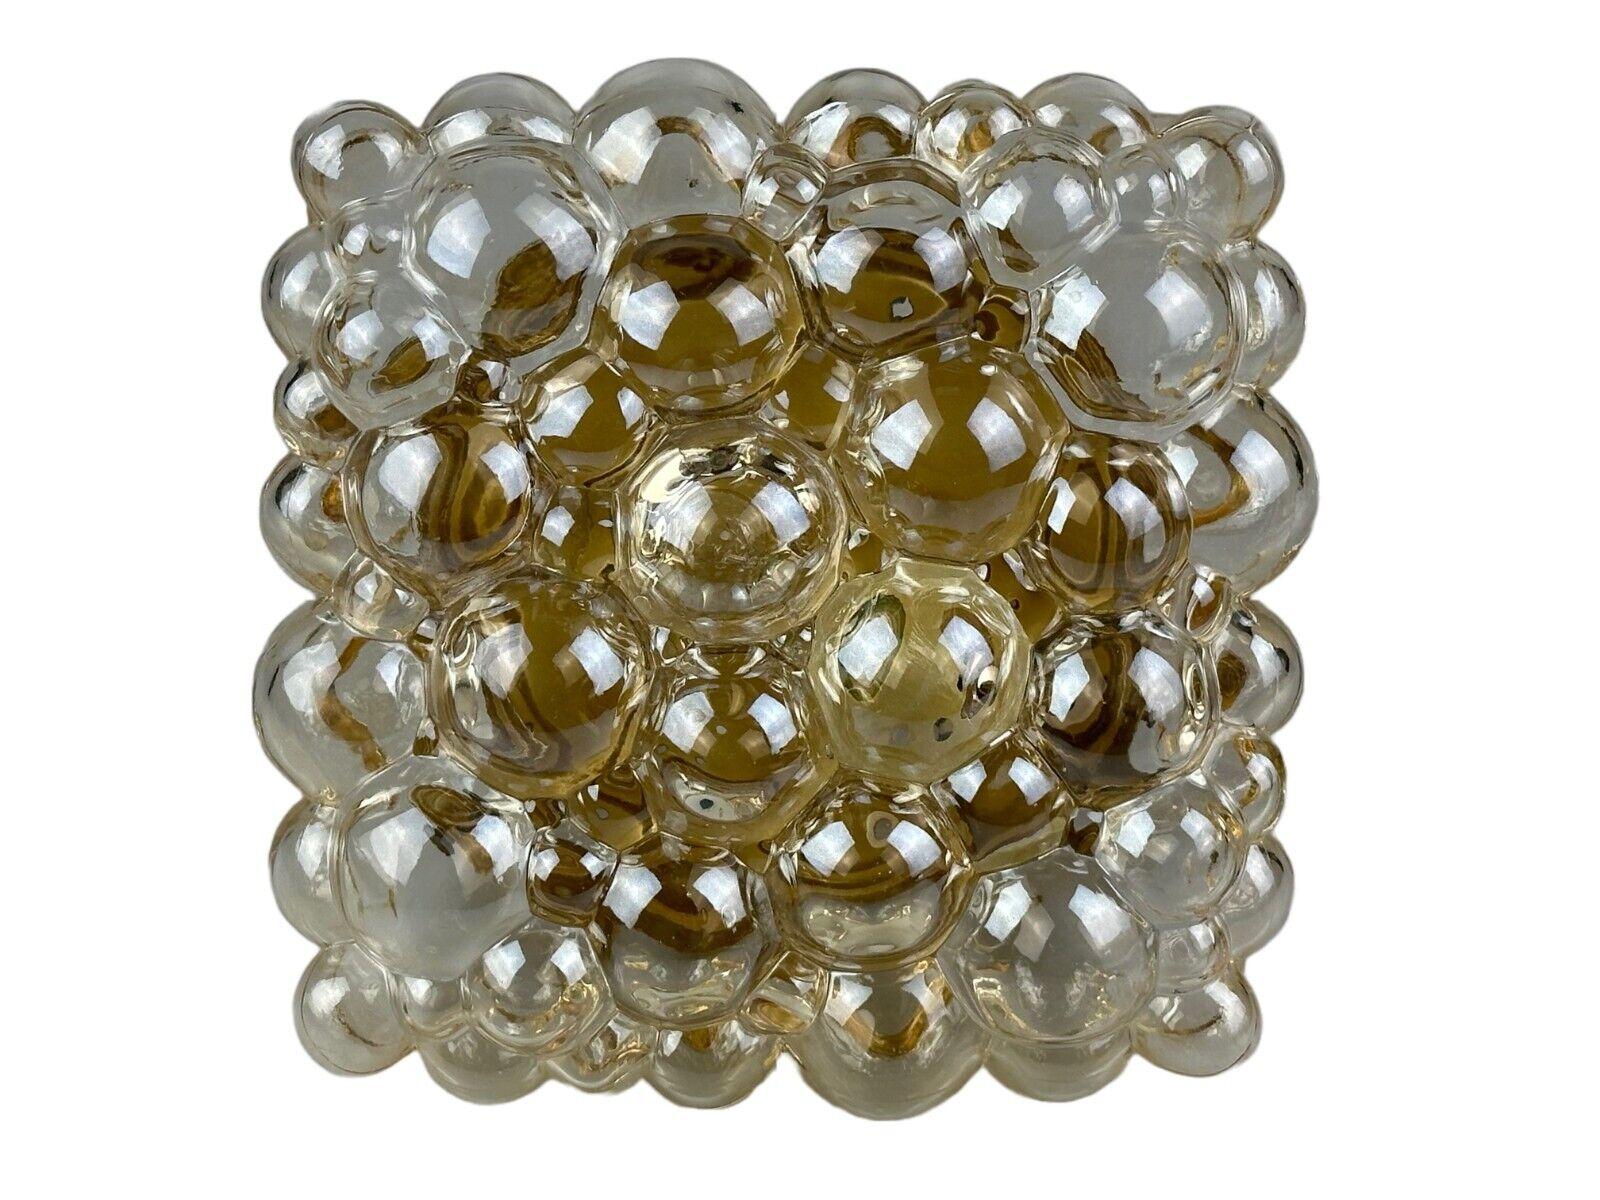 60s 70s ceiling lamp Glashütte Limburg Germany Helena Tynell Bubble

Object: wall lamp

Manufacturer: Glashütte Limburg

Condition: good

Age: around 1960-1970

Dimensions:

Width = 22.5cm
Depth = 22.5cm
Height = 10cm

Material: glass, metal

Other